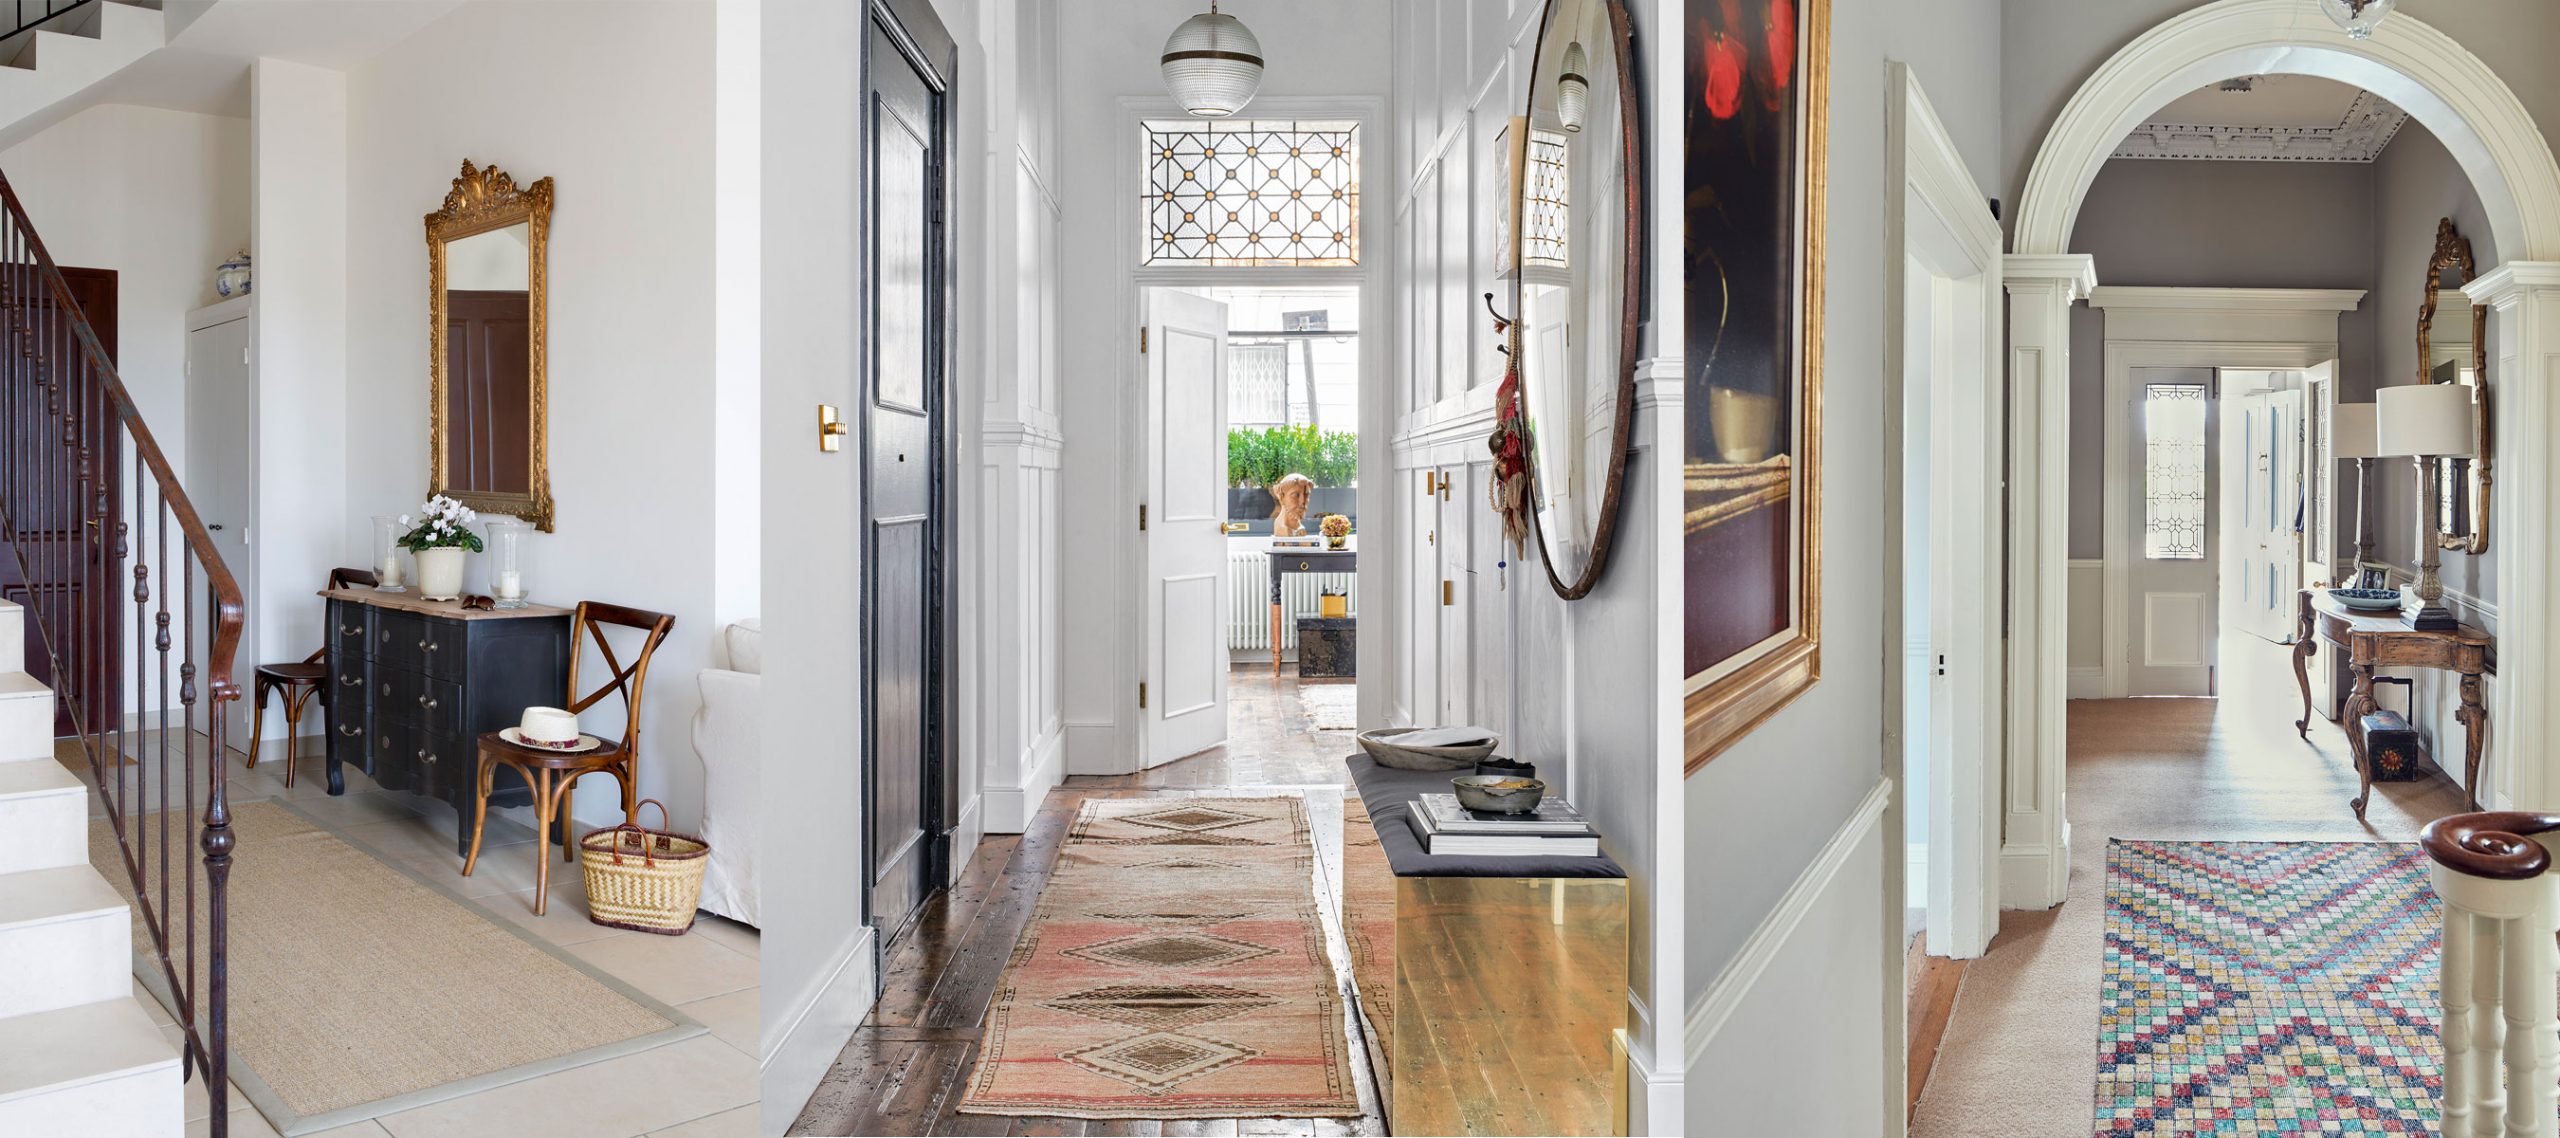 Find The Best Hallway Runner Rug To Warm Your Entrance in 2022